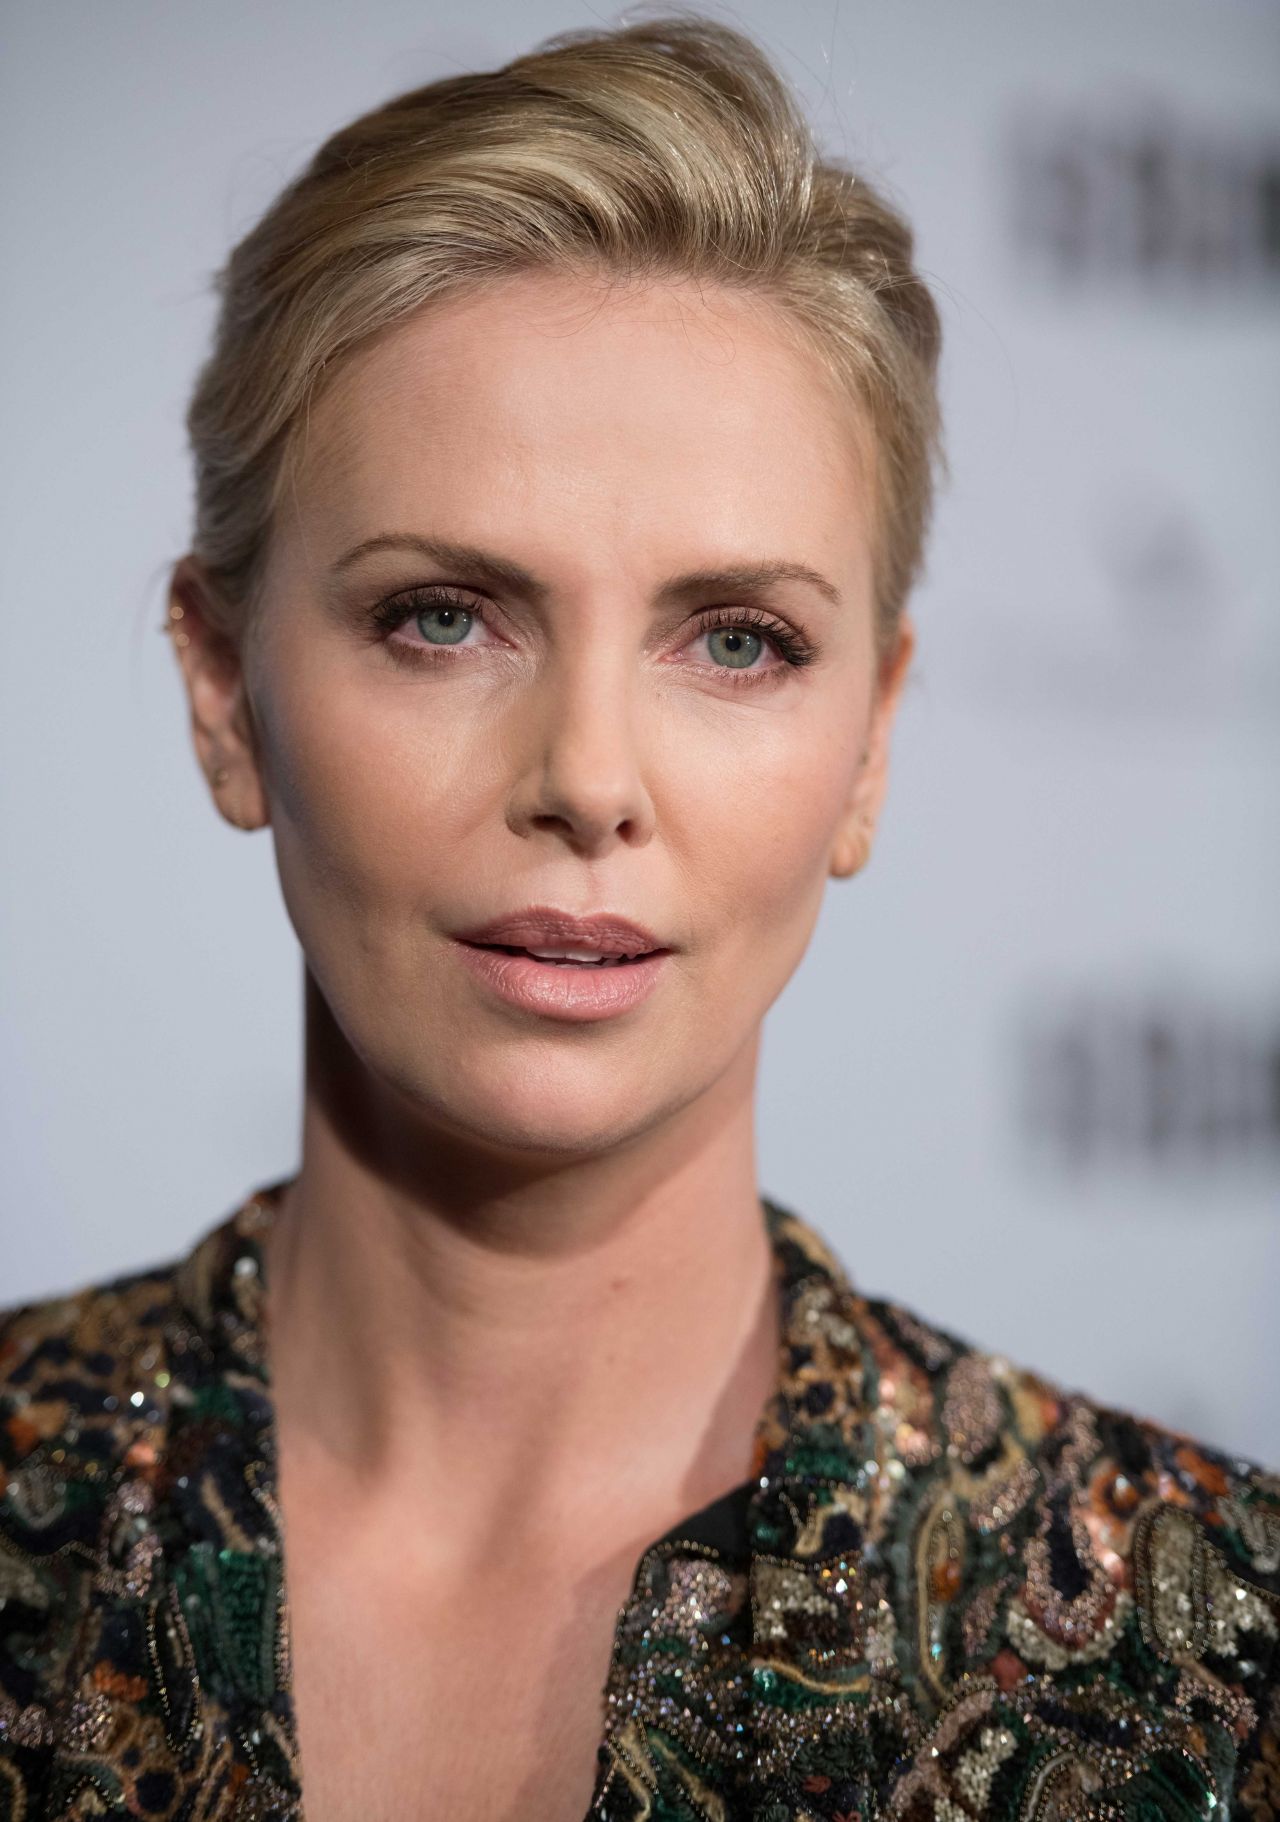 Charlize Theron Faces On Pin Pinterest Charlize Theron